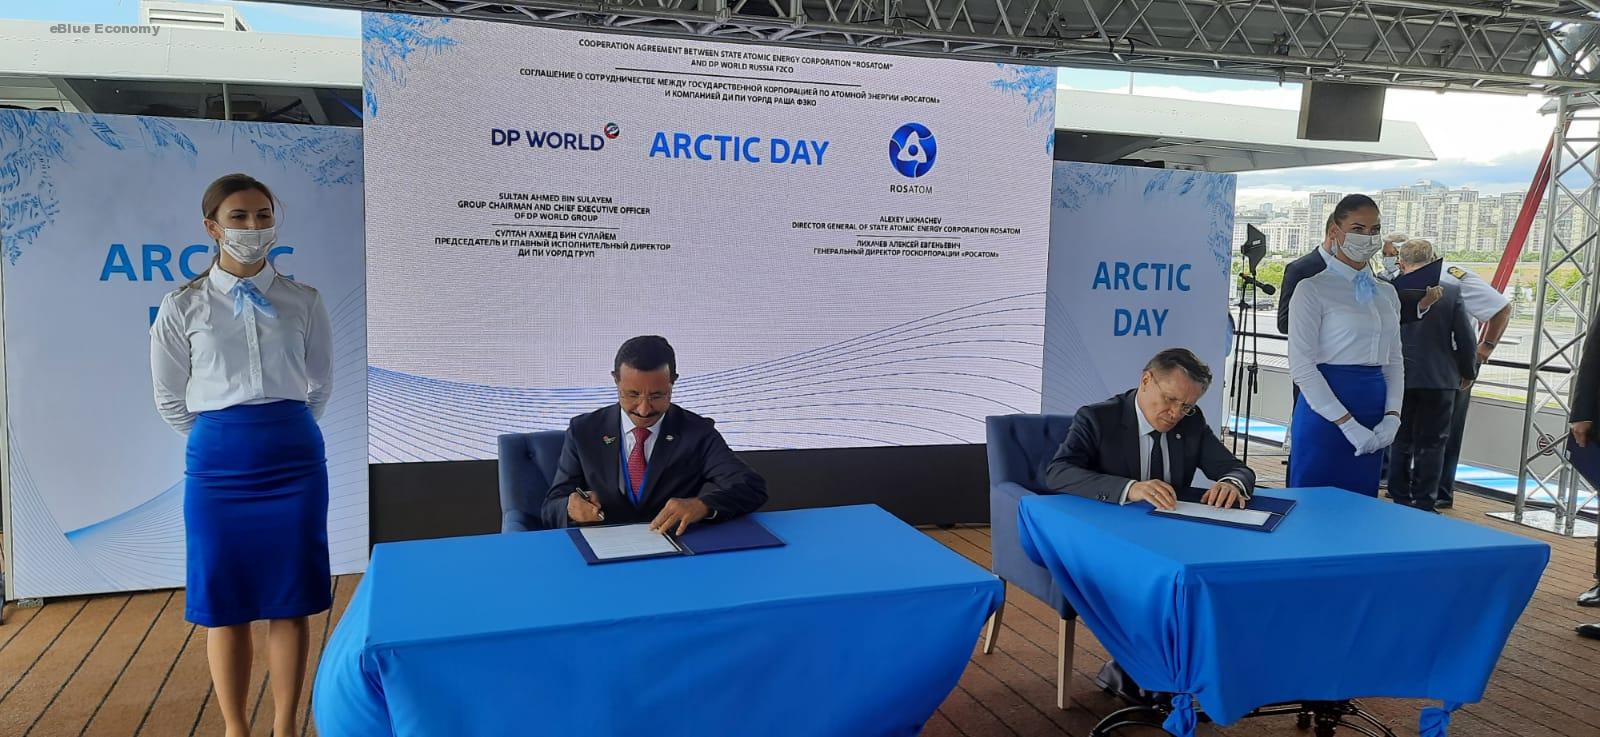 eBlue_economy_DP Signs Agreement on Northern Sea Route